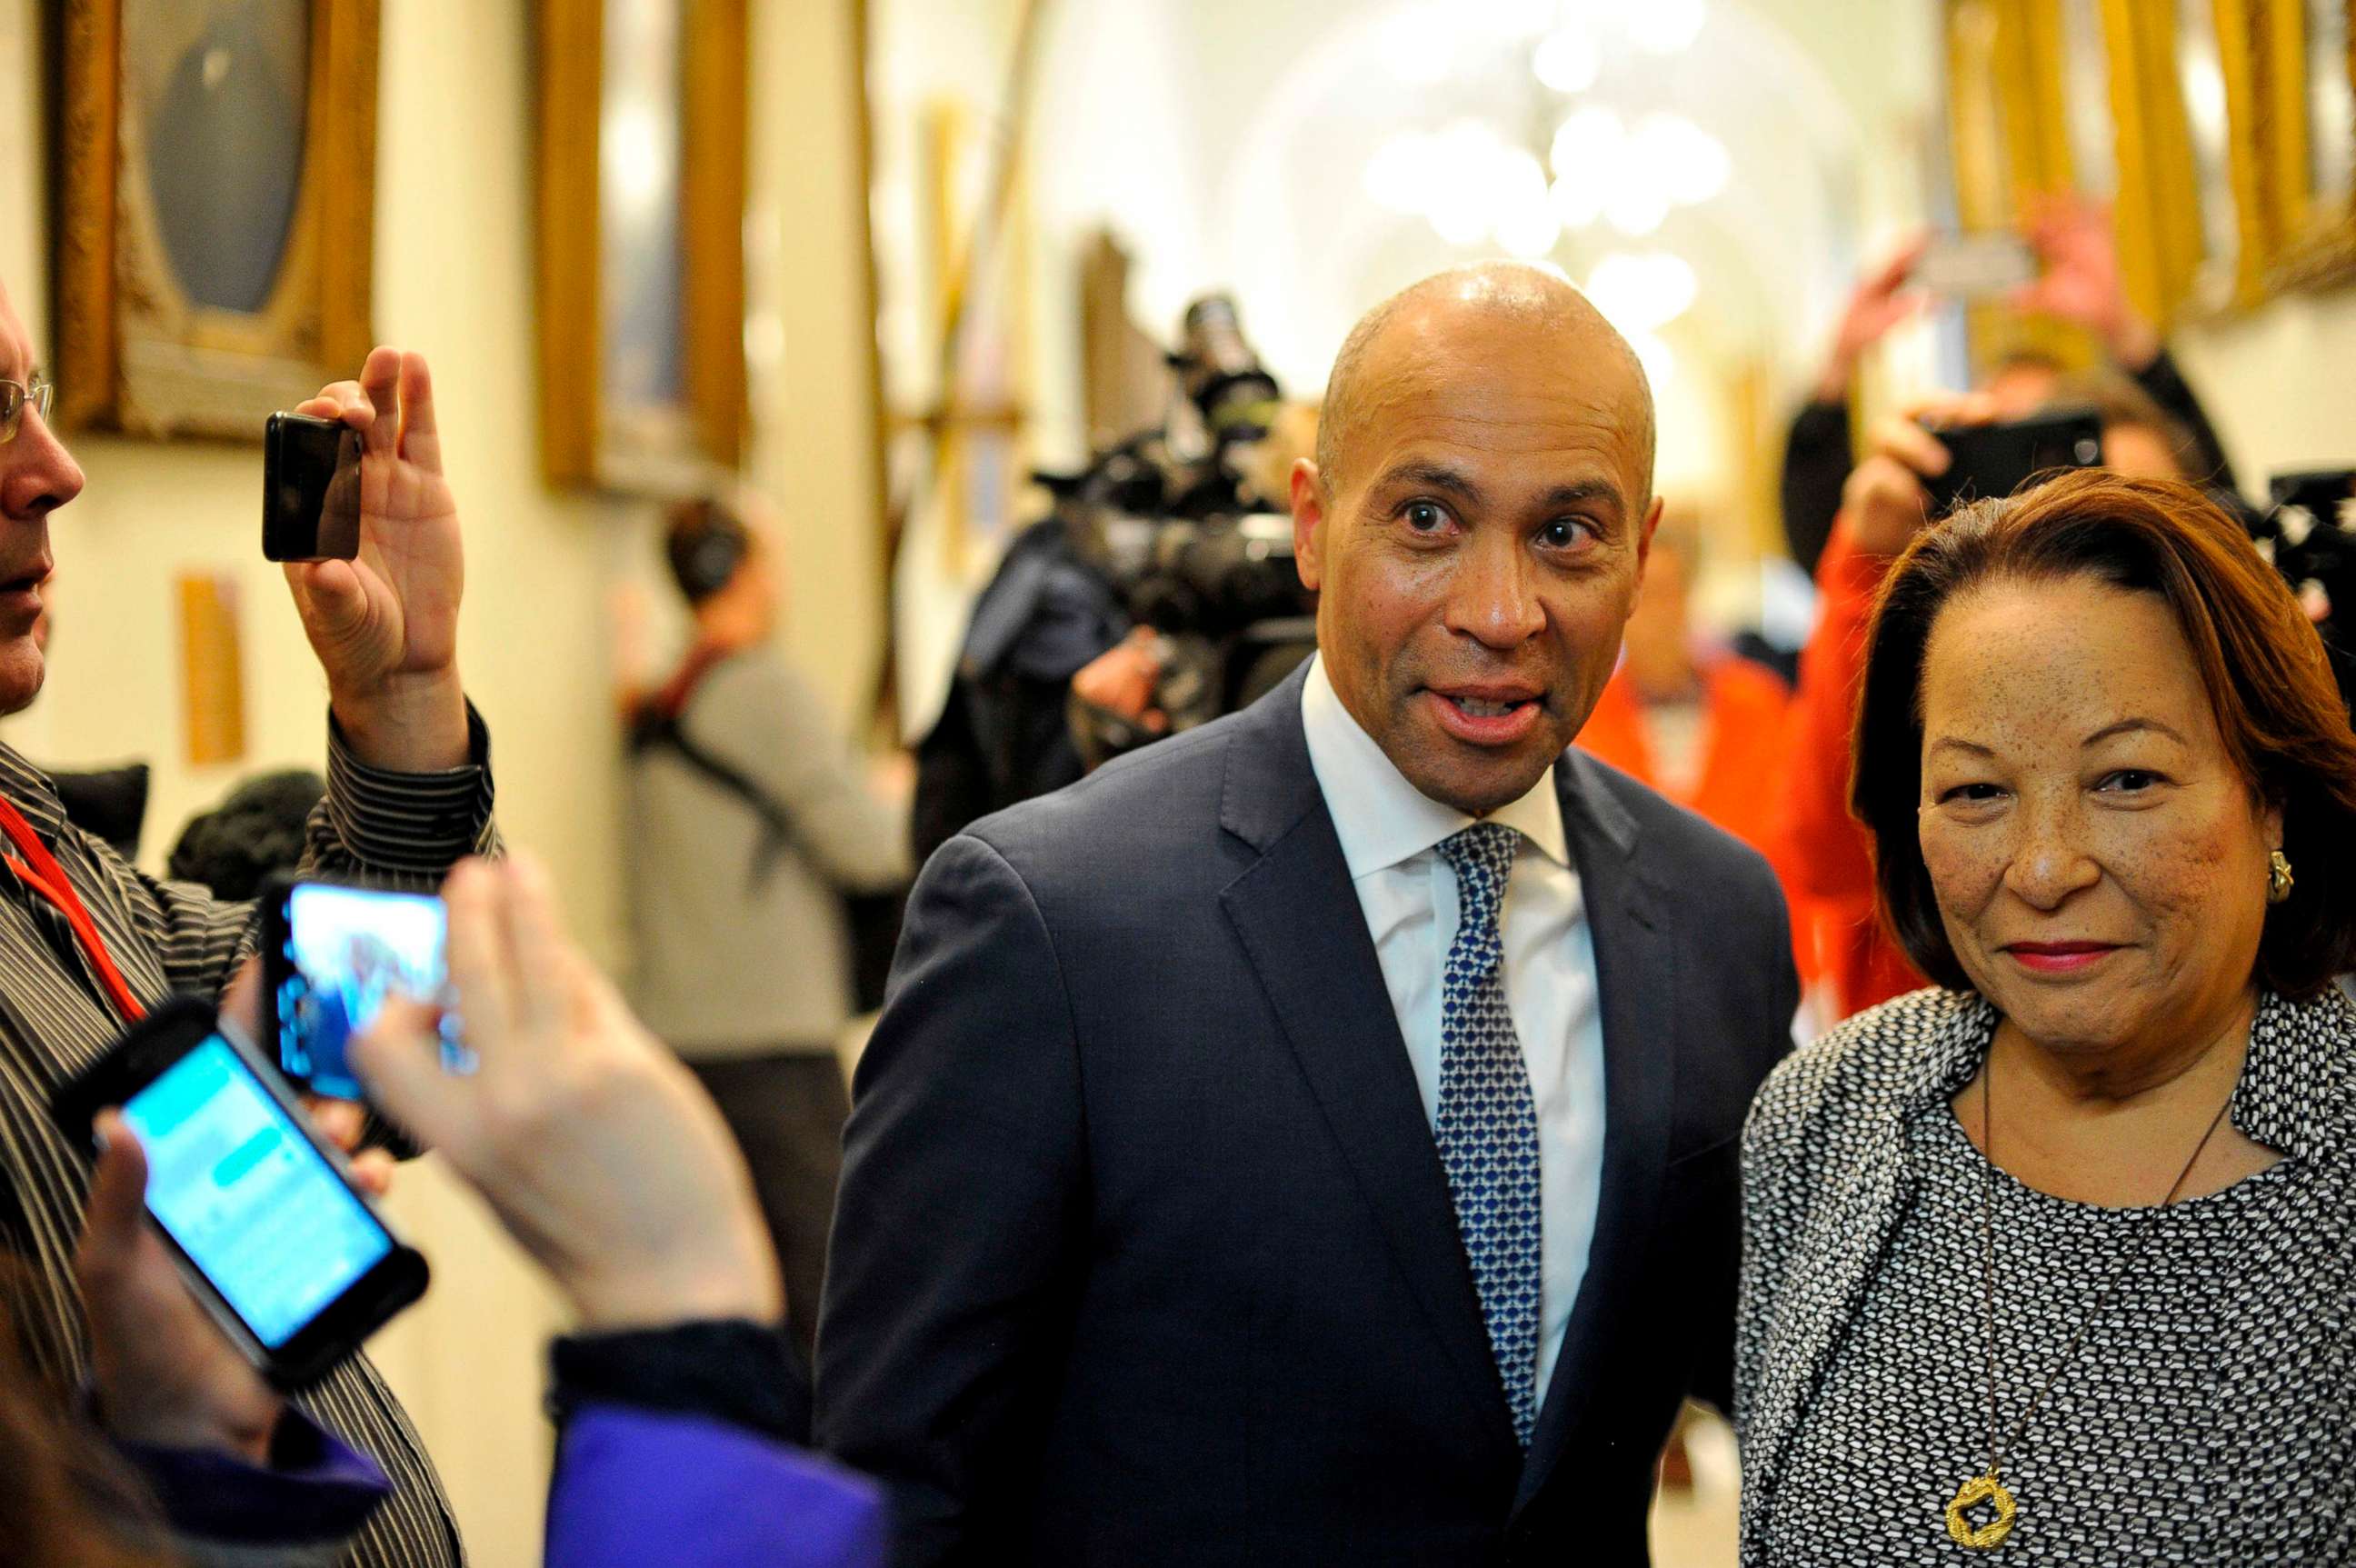 PHOTO: Deval Patrick is shown with his wife, Diane, on his way to officially enter the US Presidential race by signing paperwork to join the New Hampshire primary ballot, at the New Hampshire State House on Nov. 14, 2019, in Concord, N.H.